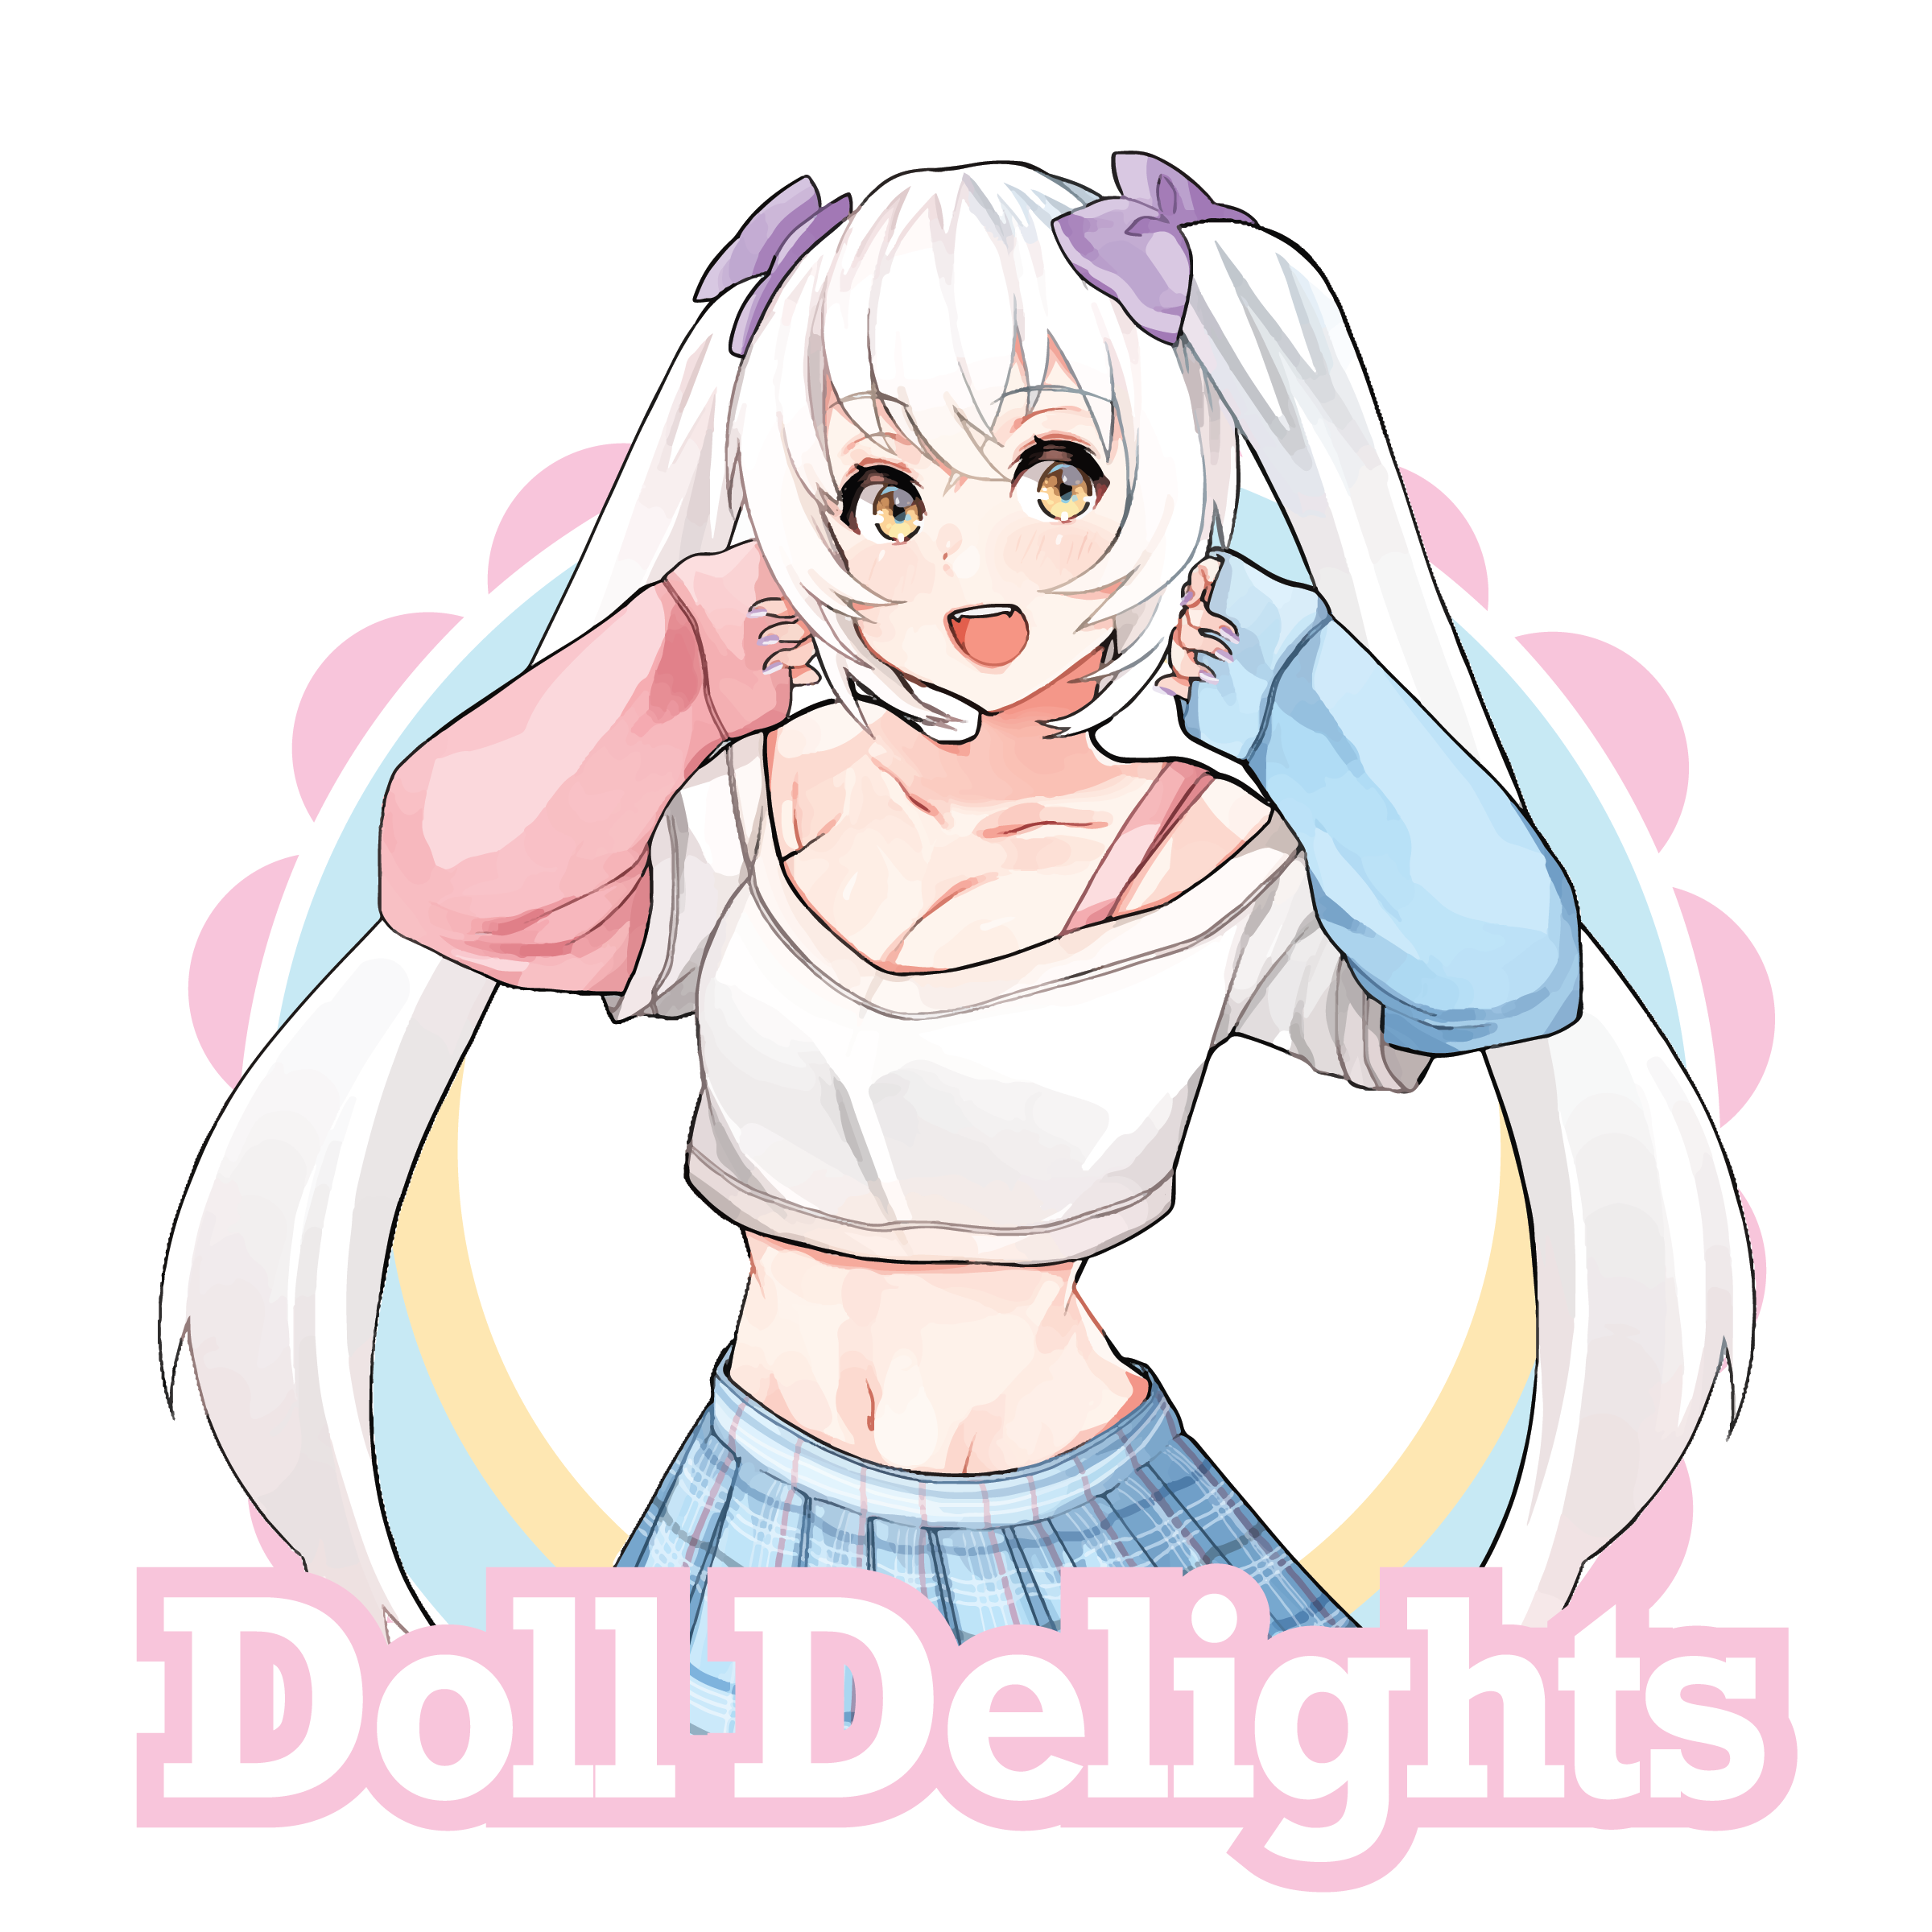 Doll Delights